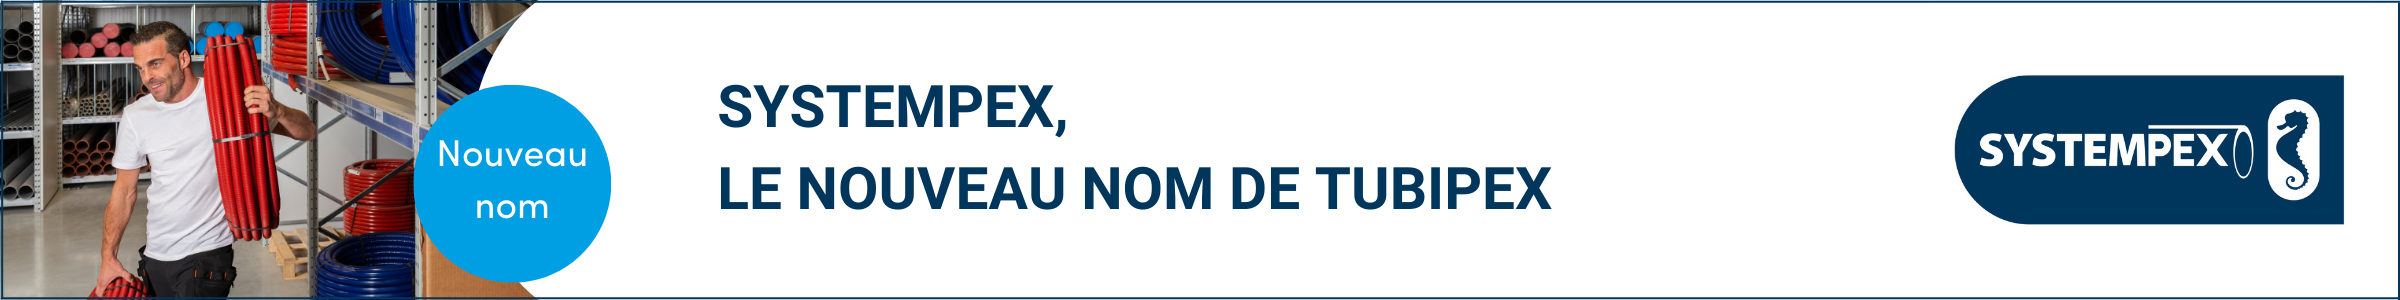 Banner Tubipex_Systempex_FR.png